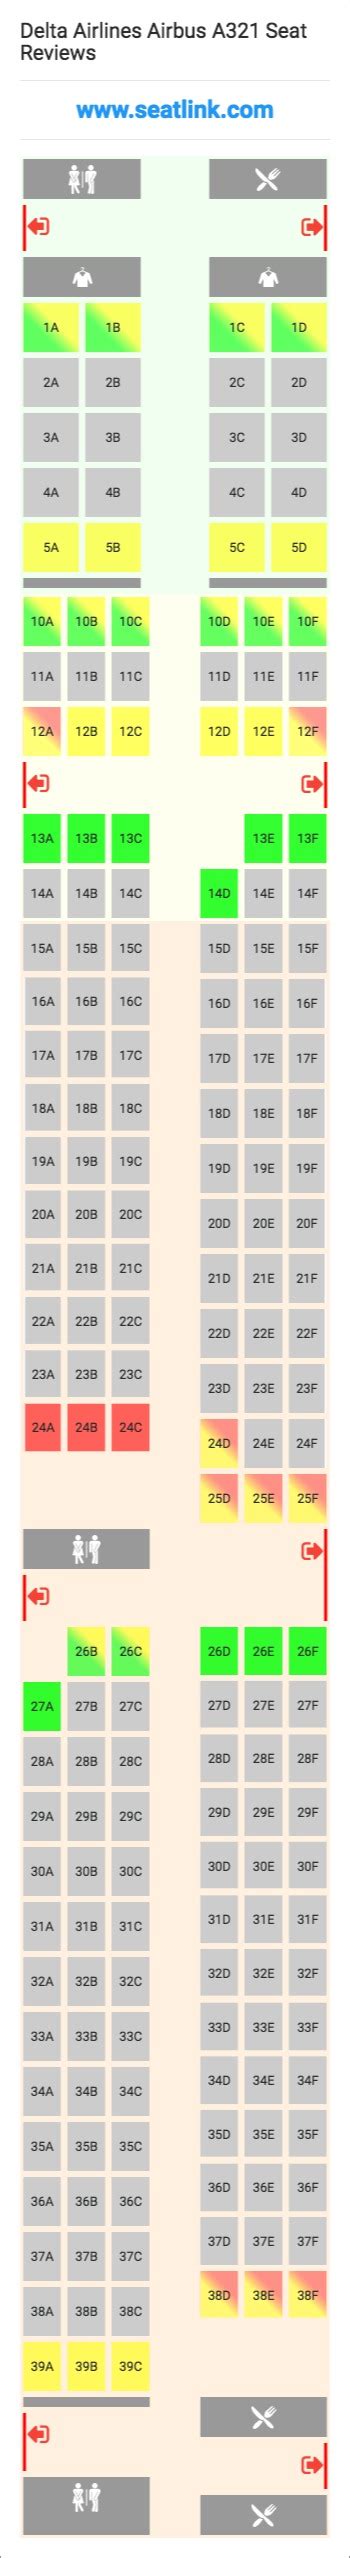 Delta Airlines Airbus A321 Seating Chart Updated November 2020 Seatlink